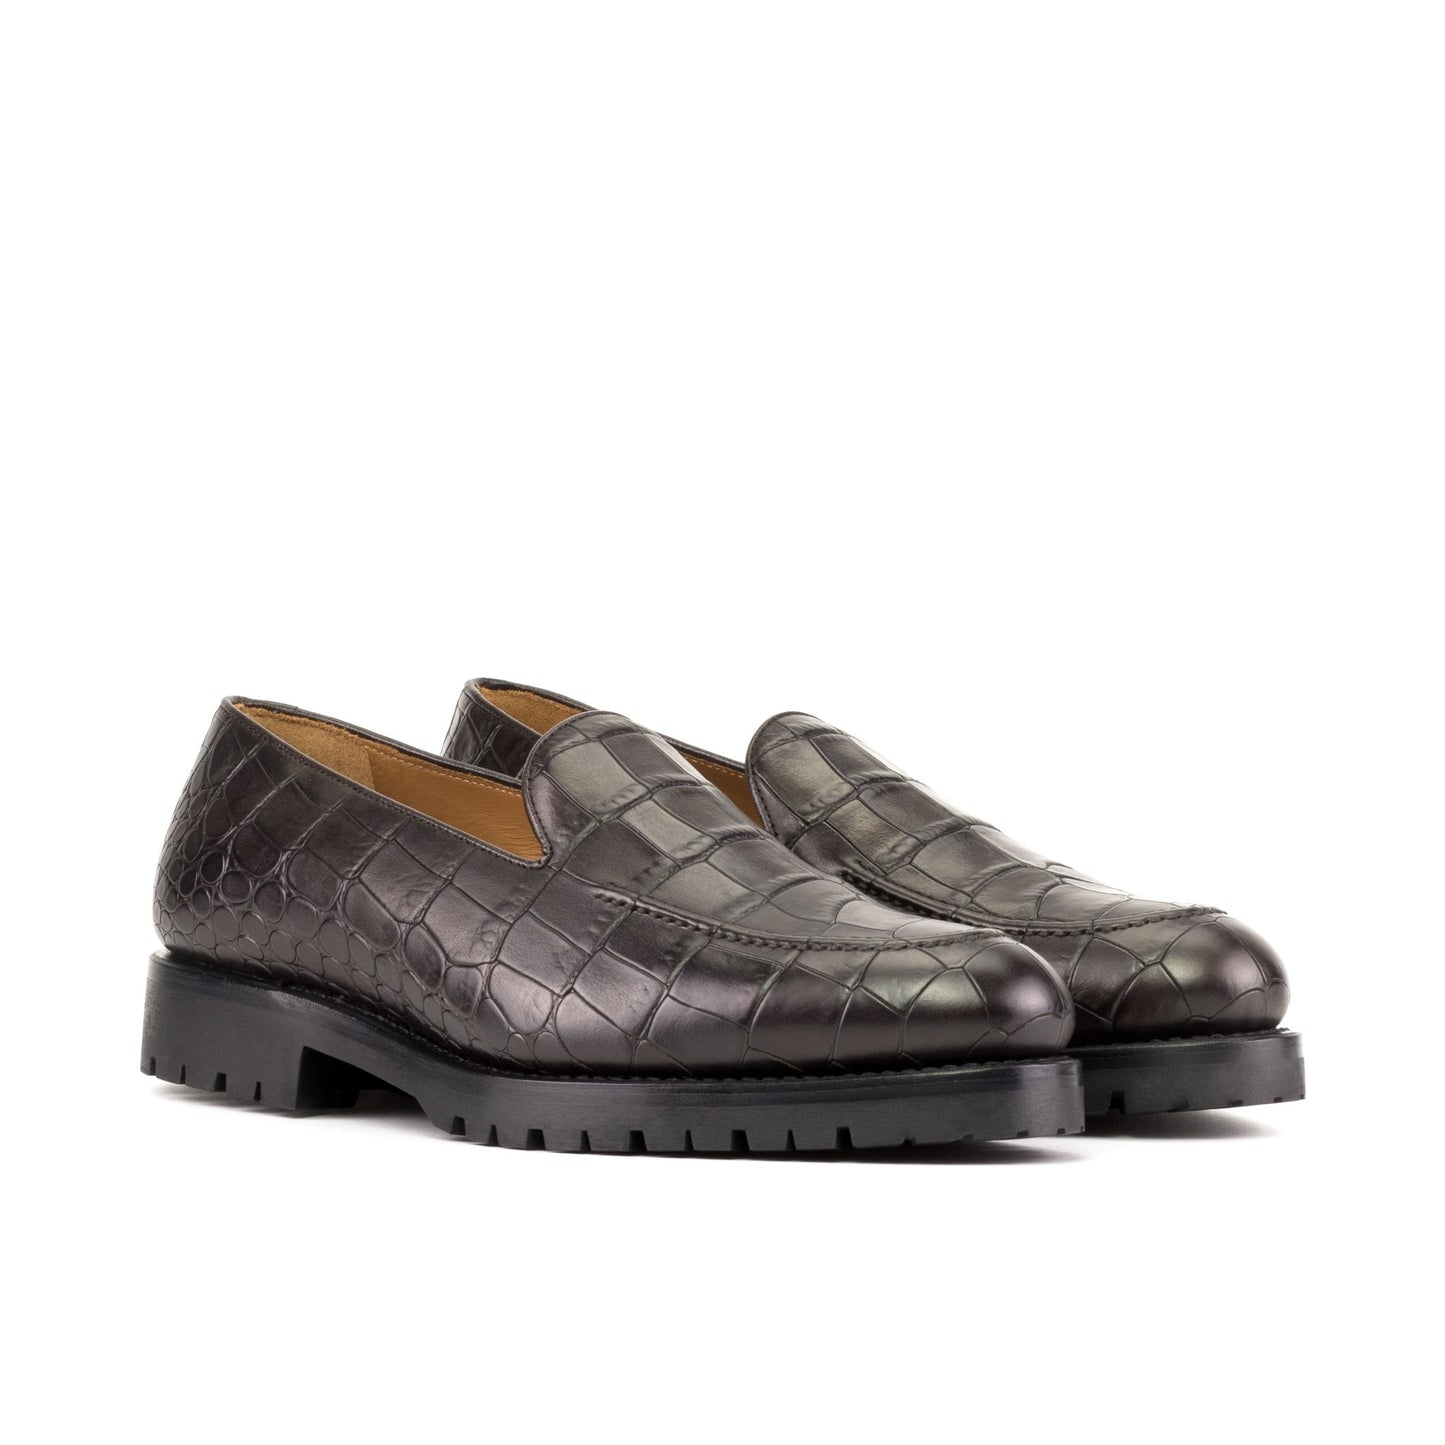 Loafer in Dark Brown Croco - Zatorres | Free Shipping on orders over $200